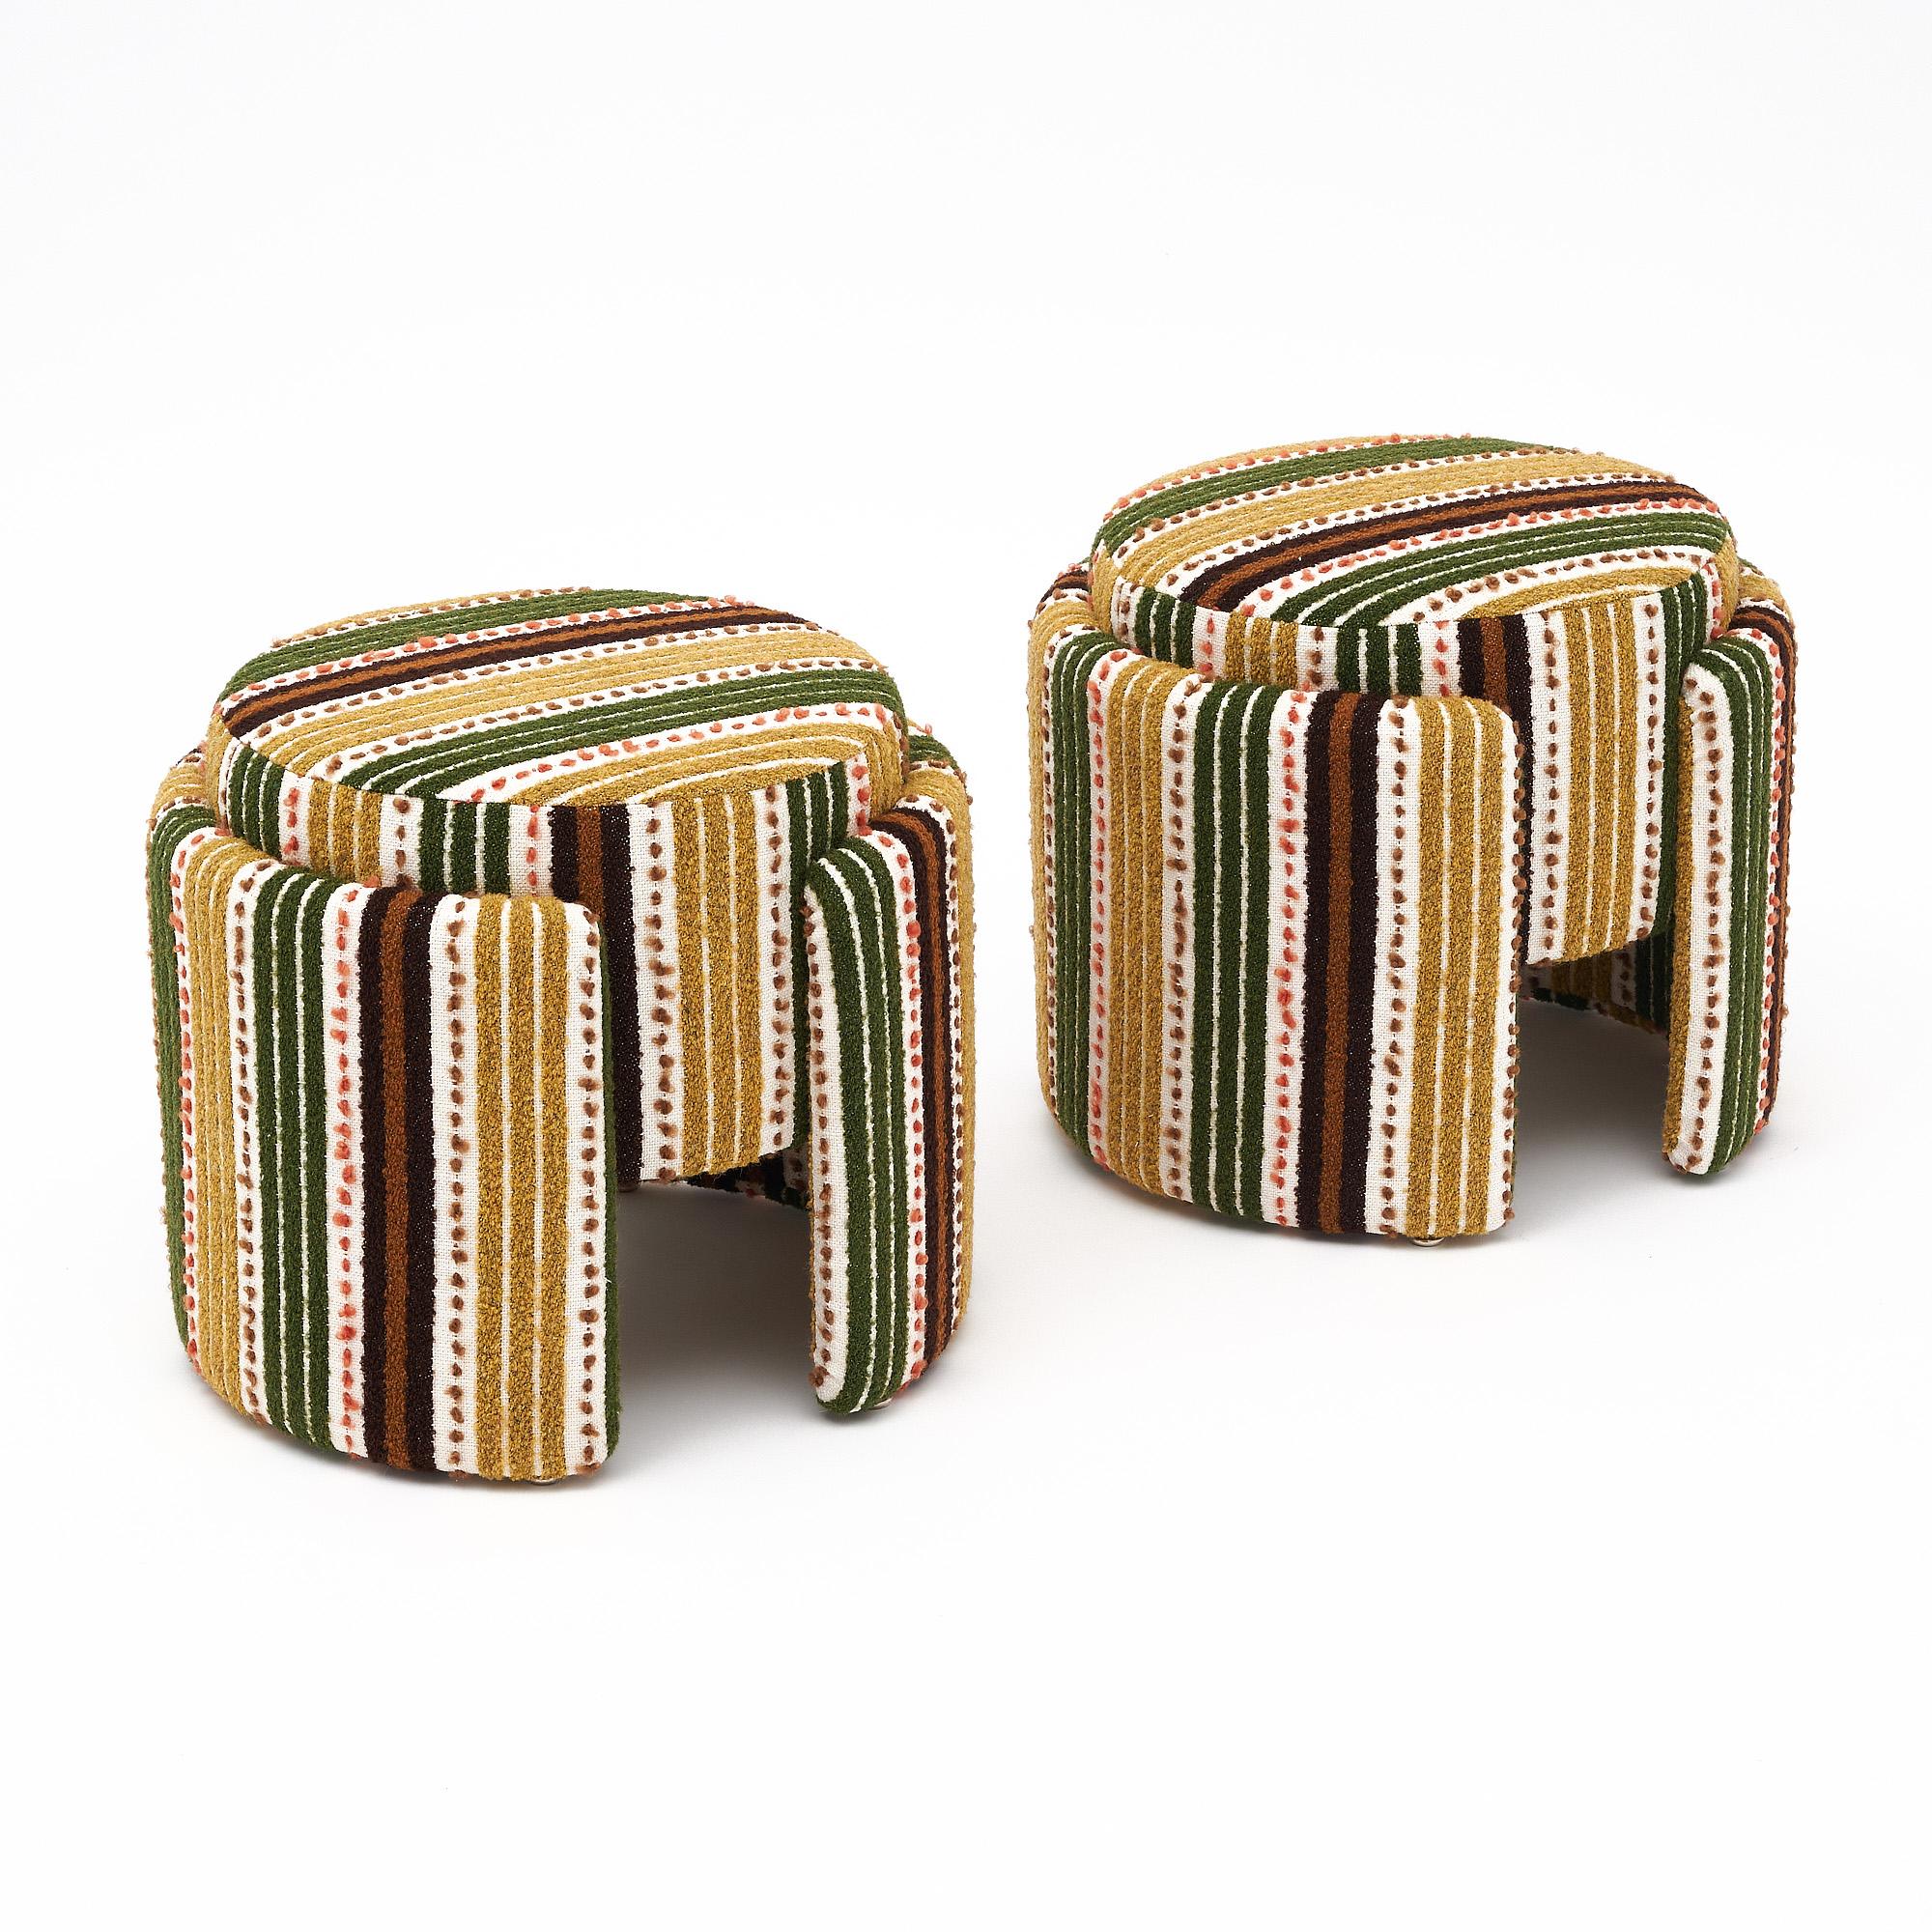 Pair of stools in the mid-century style from Italy. The stools are circular in design with curved legs on each. They have been upholstered in a Paul Smith fabric.